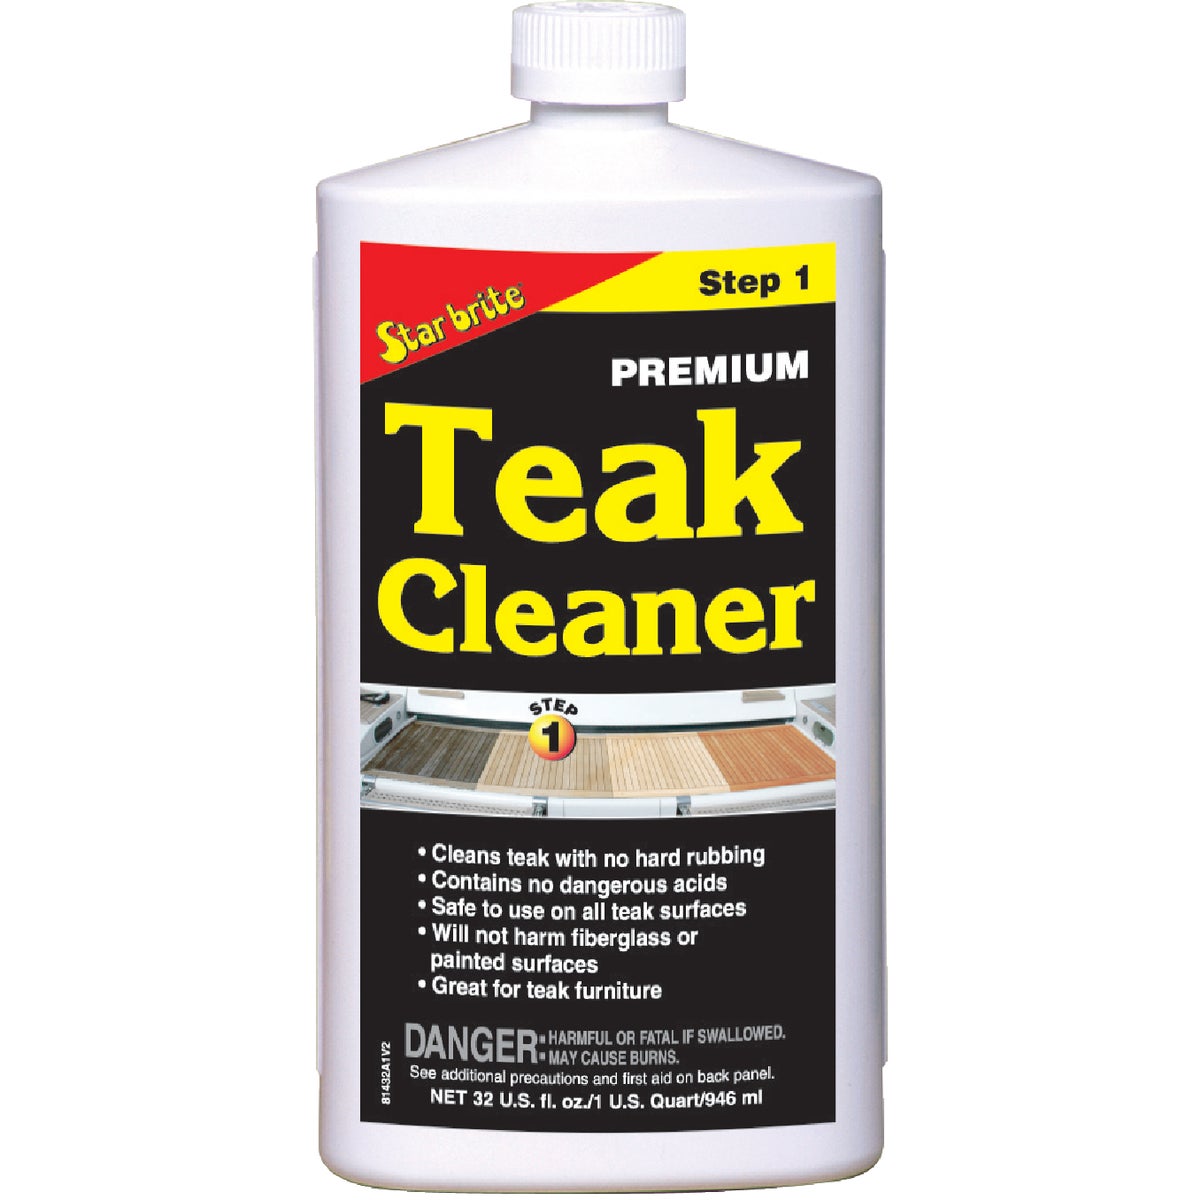 Item 581043, Starbrite teak cleaner also cleans other woods and can be used on teak 